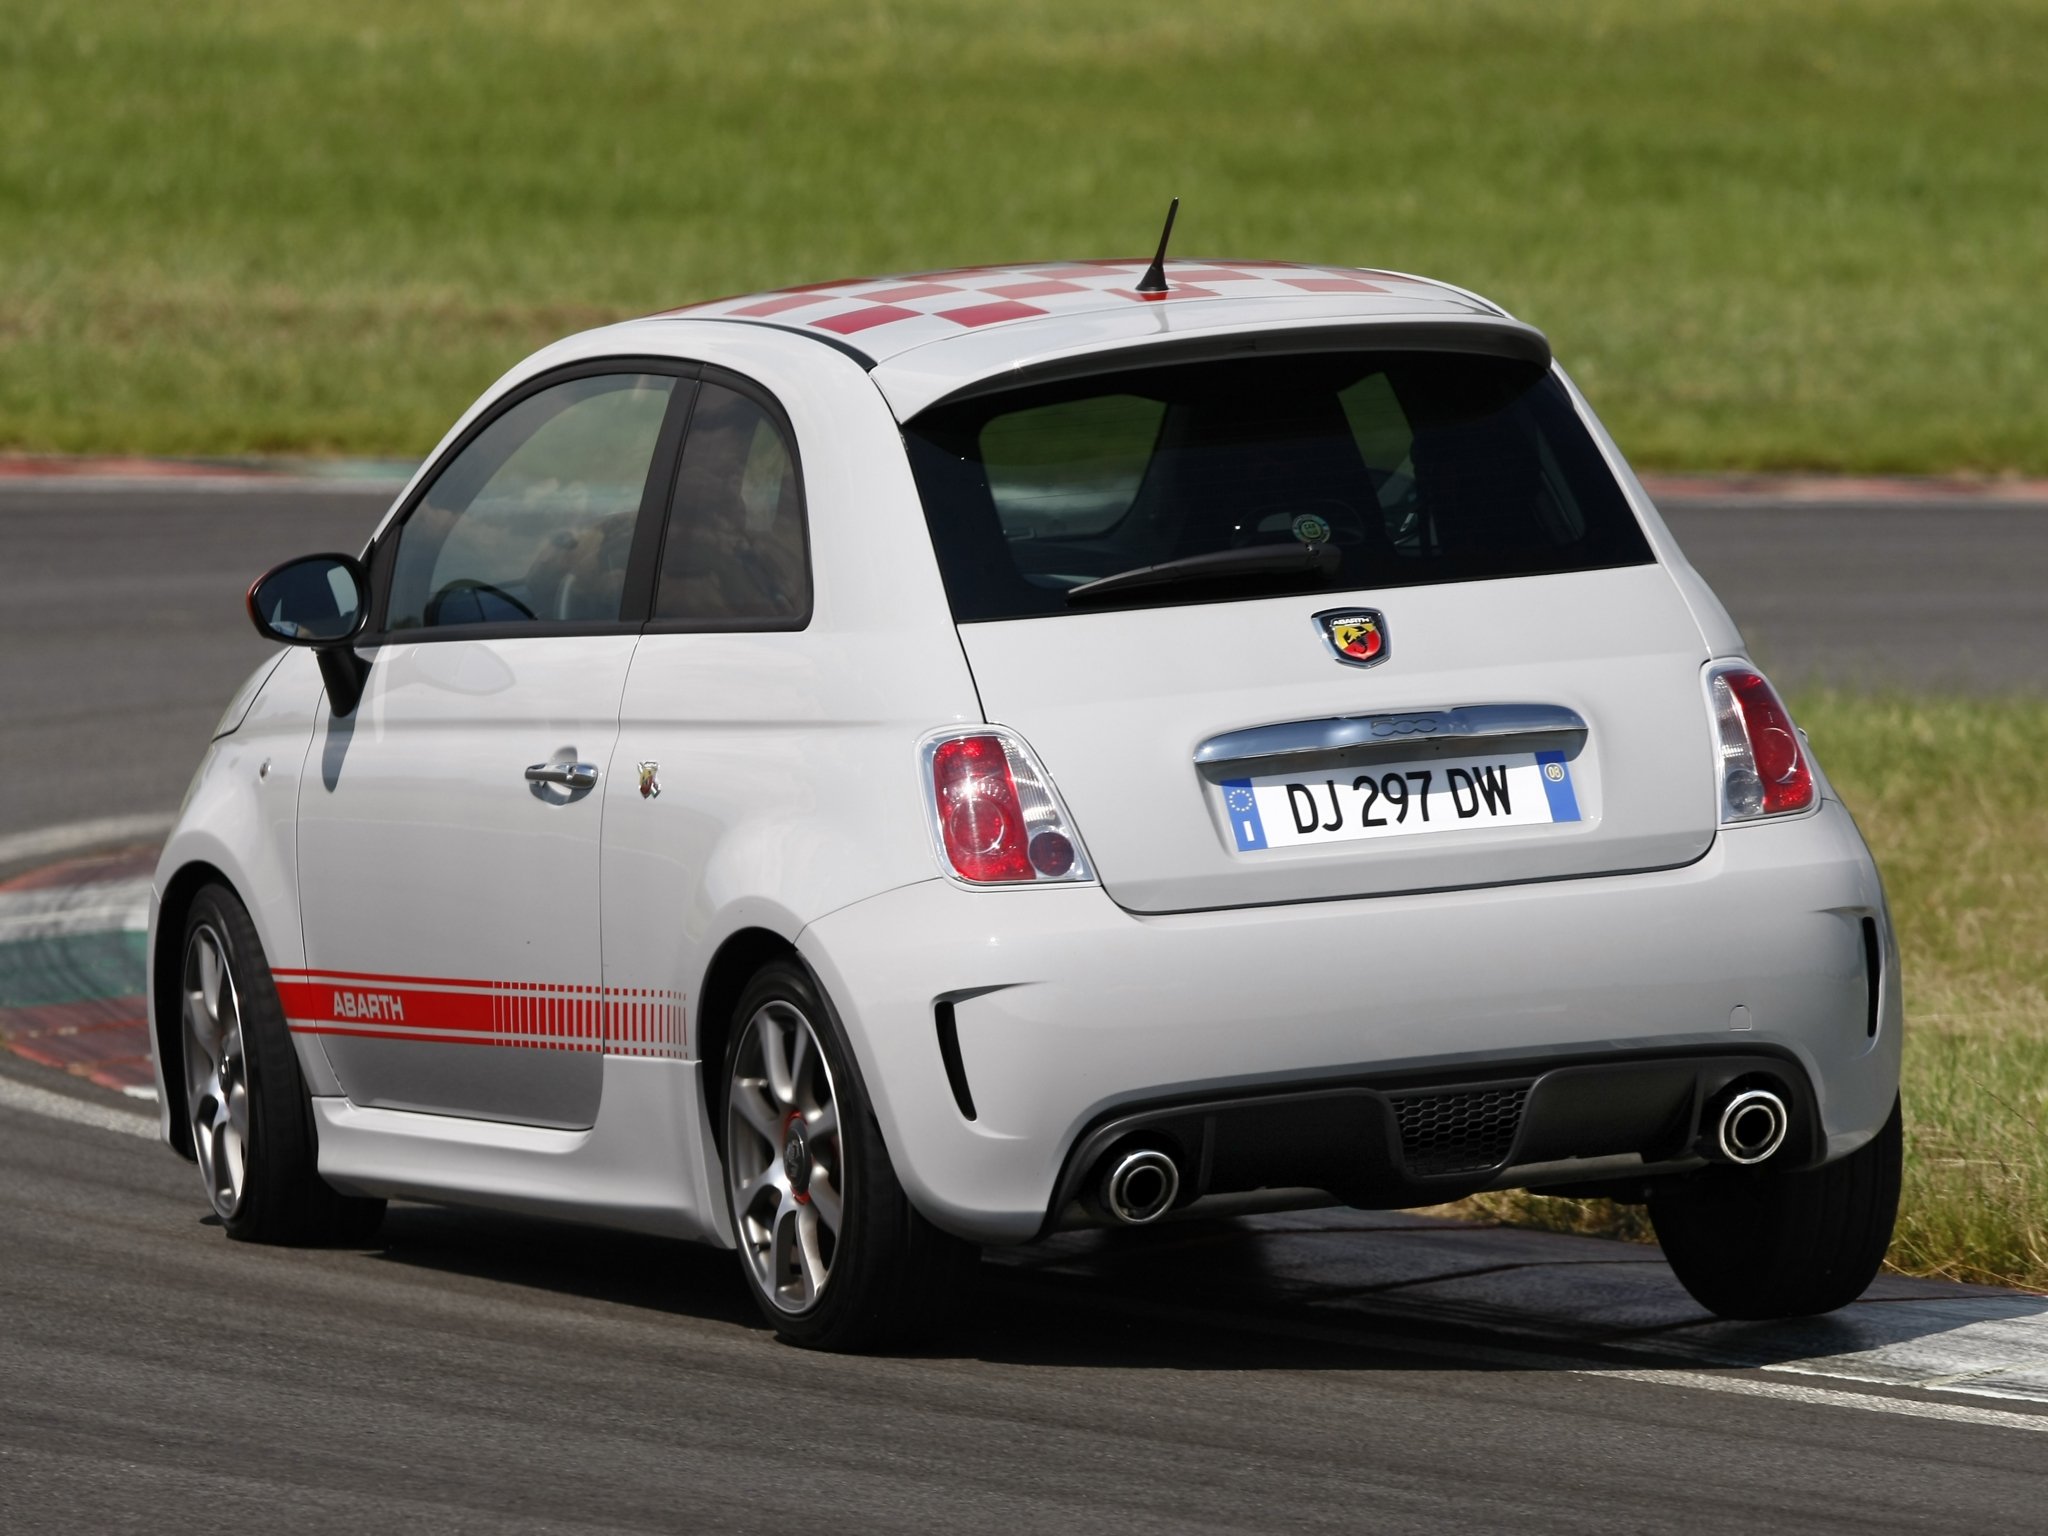 abarth, 500, Fiat, Opening, Edition, 2008 Wallpaper